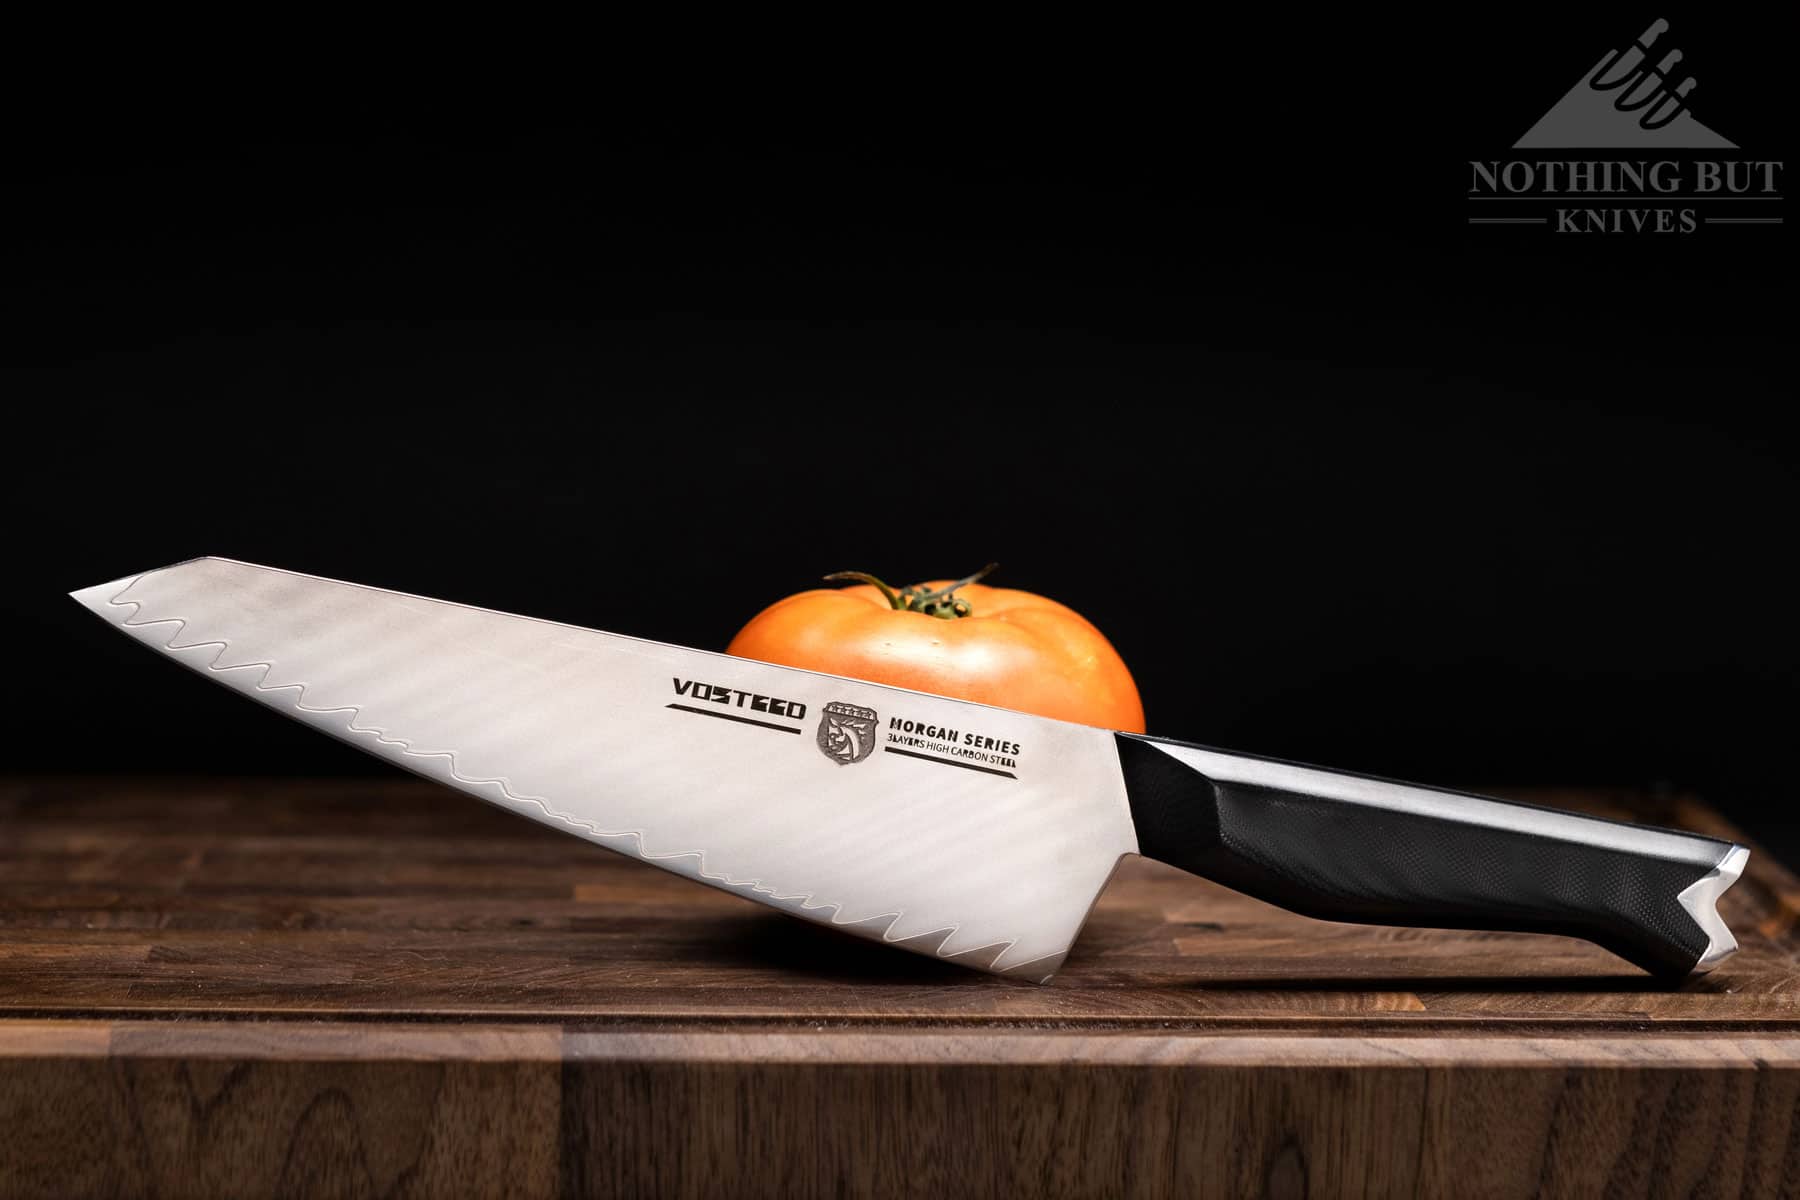 The Vosteed Morgan chef knife offers good  performance for the money. It is shown here on a wood cutting board next to a tomato.